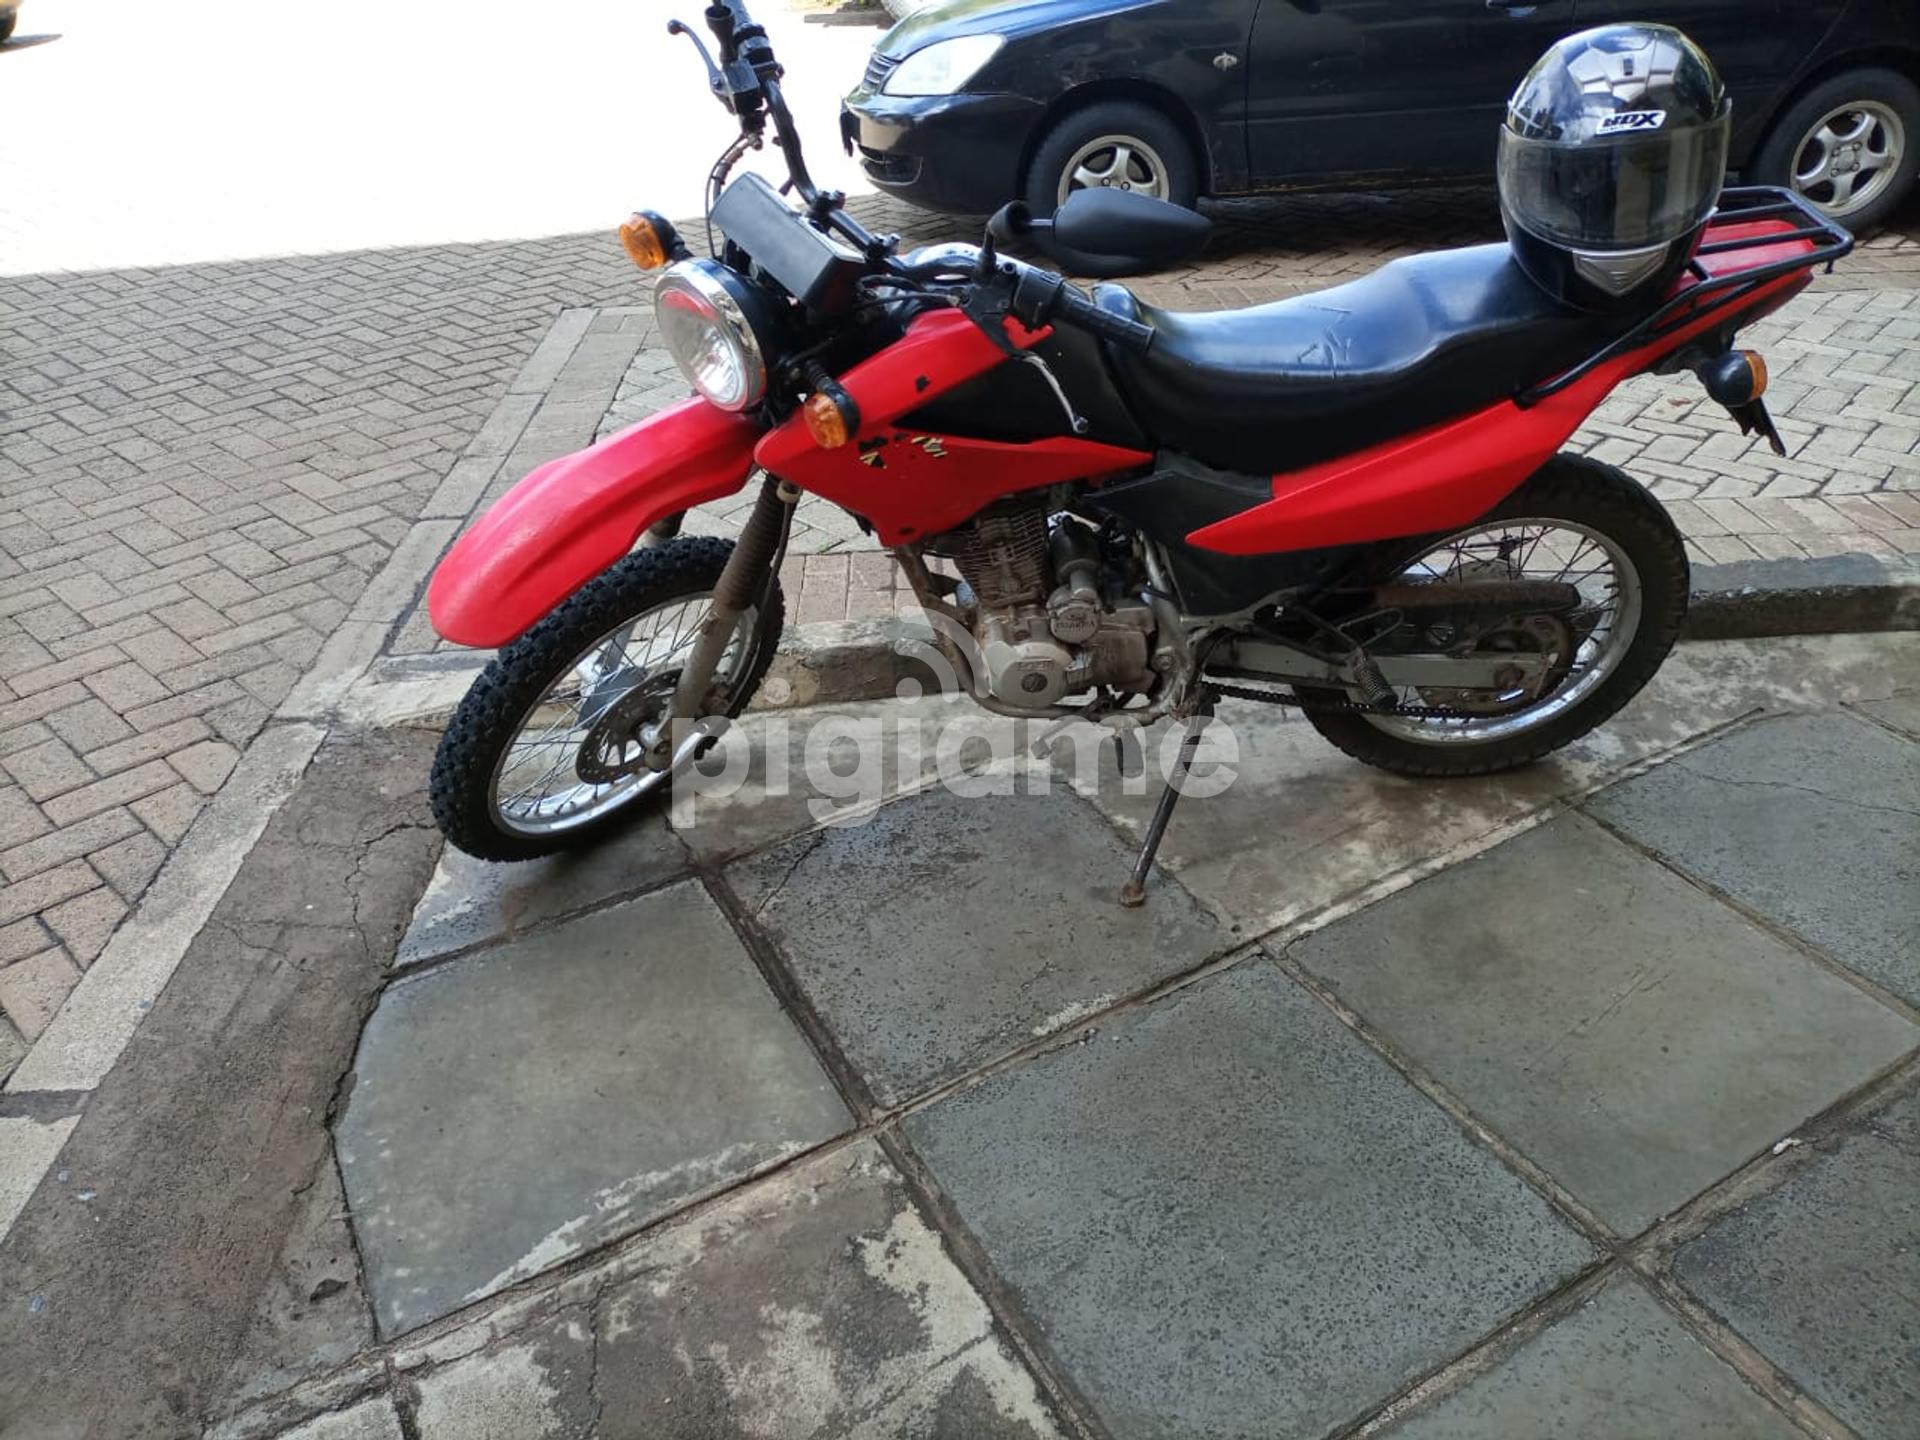 Honda Xr 125 For Sale In Lang Ata St Marys Hospital Pigiame